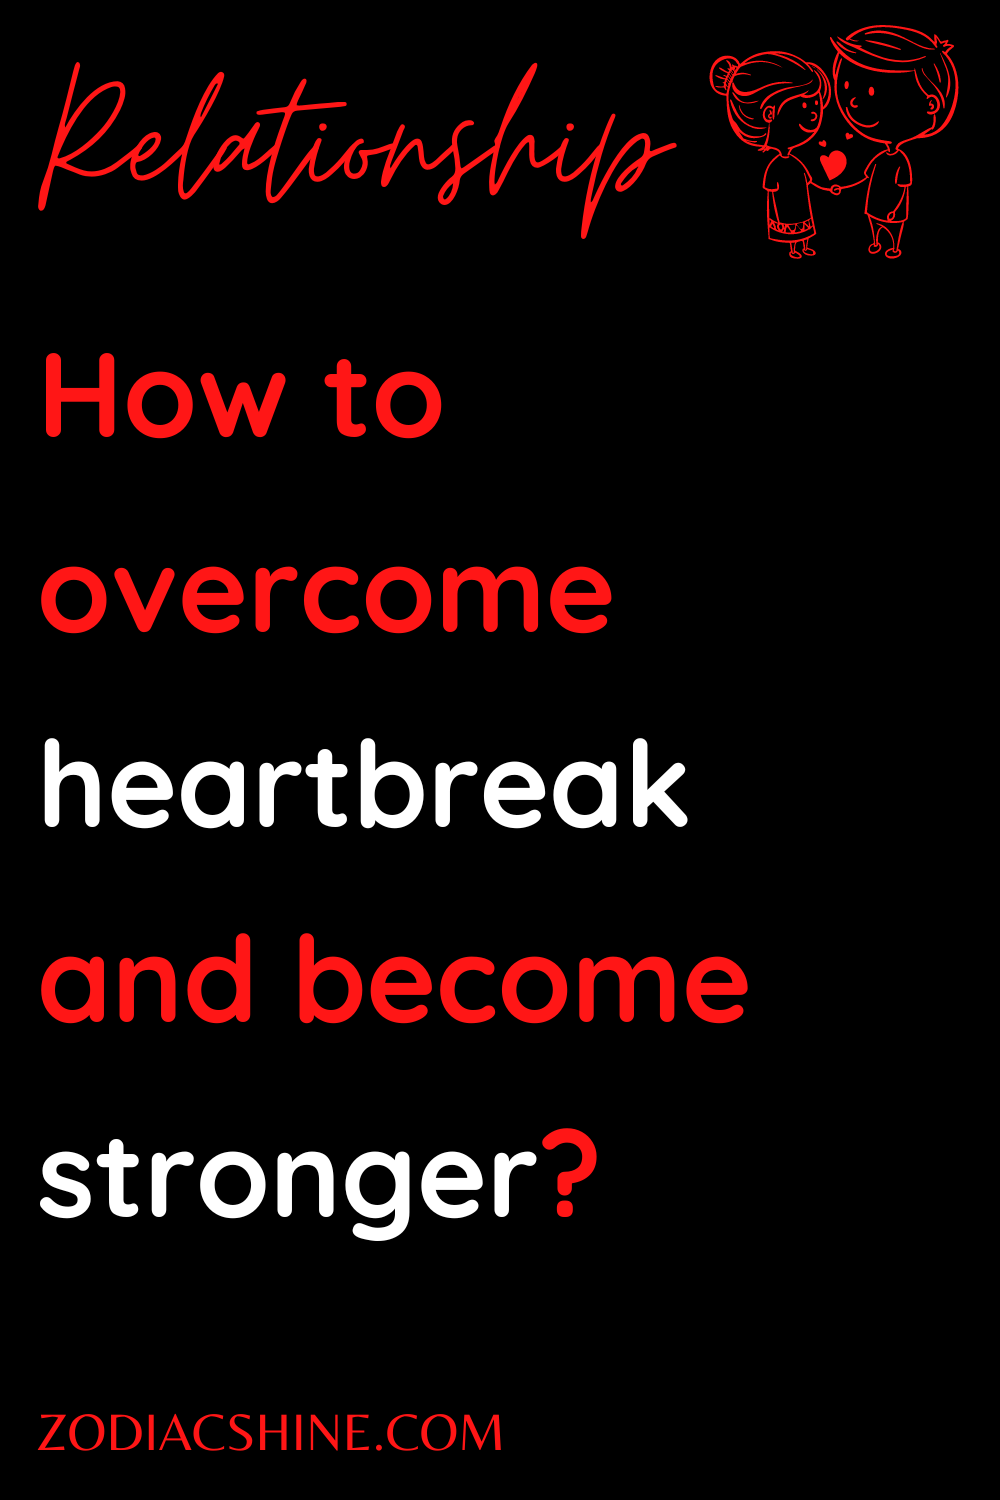 How to overcome heartbreak and become stronger?